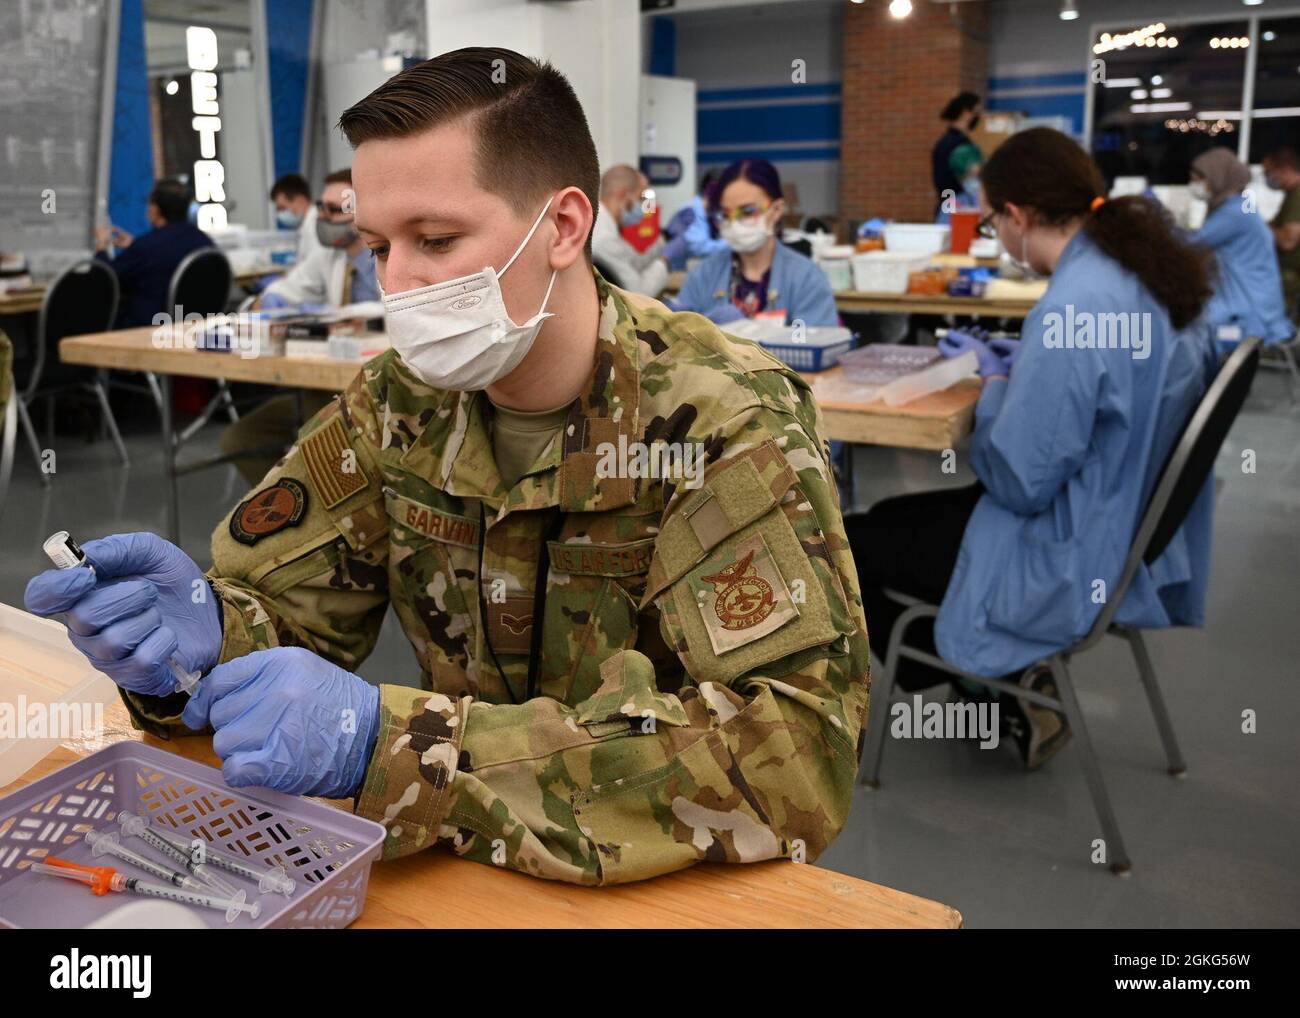 U.S. Air Force Senior Airman Michael Garvin, an Orwell, New York, native and fire fighter with the 628th Civil Engineering Squadron, 628th Air Base Wing stationed at Joint Base Charleston, South Carolina, draws a COVID-19 vaccine at the state-led, federally-supported Ford Field Community Vaccination Center in Detroit, Michigan, April 14, 2021. Garvin is part of a group of Airmen assigned to 1st Detachment, 64th Air Expeditionary Group, that are assisting with the vaccination efforts. Garvin's main responsibility is supporting local community members by preparing COVID-19 vaccines for vaccinato Stock Photo